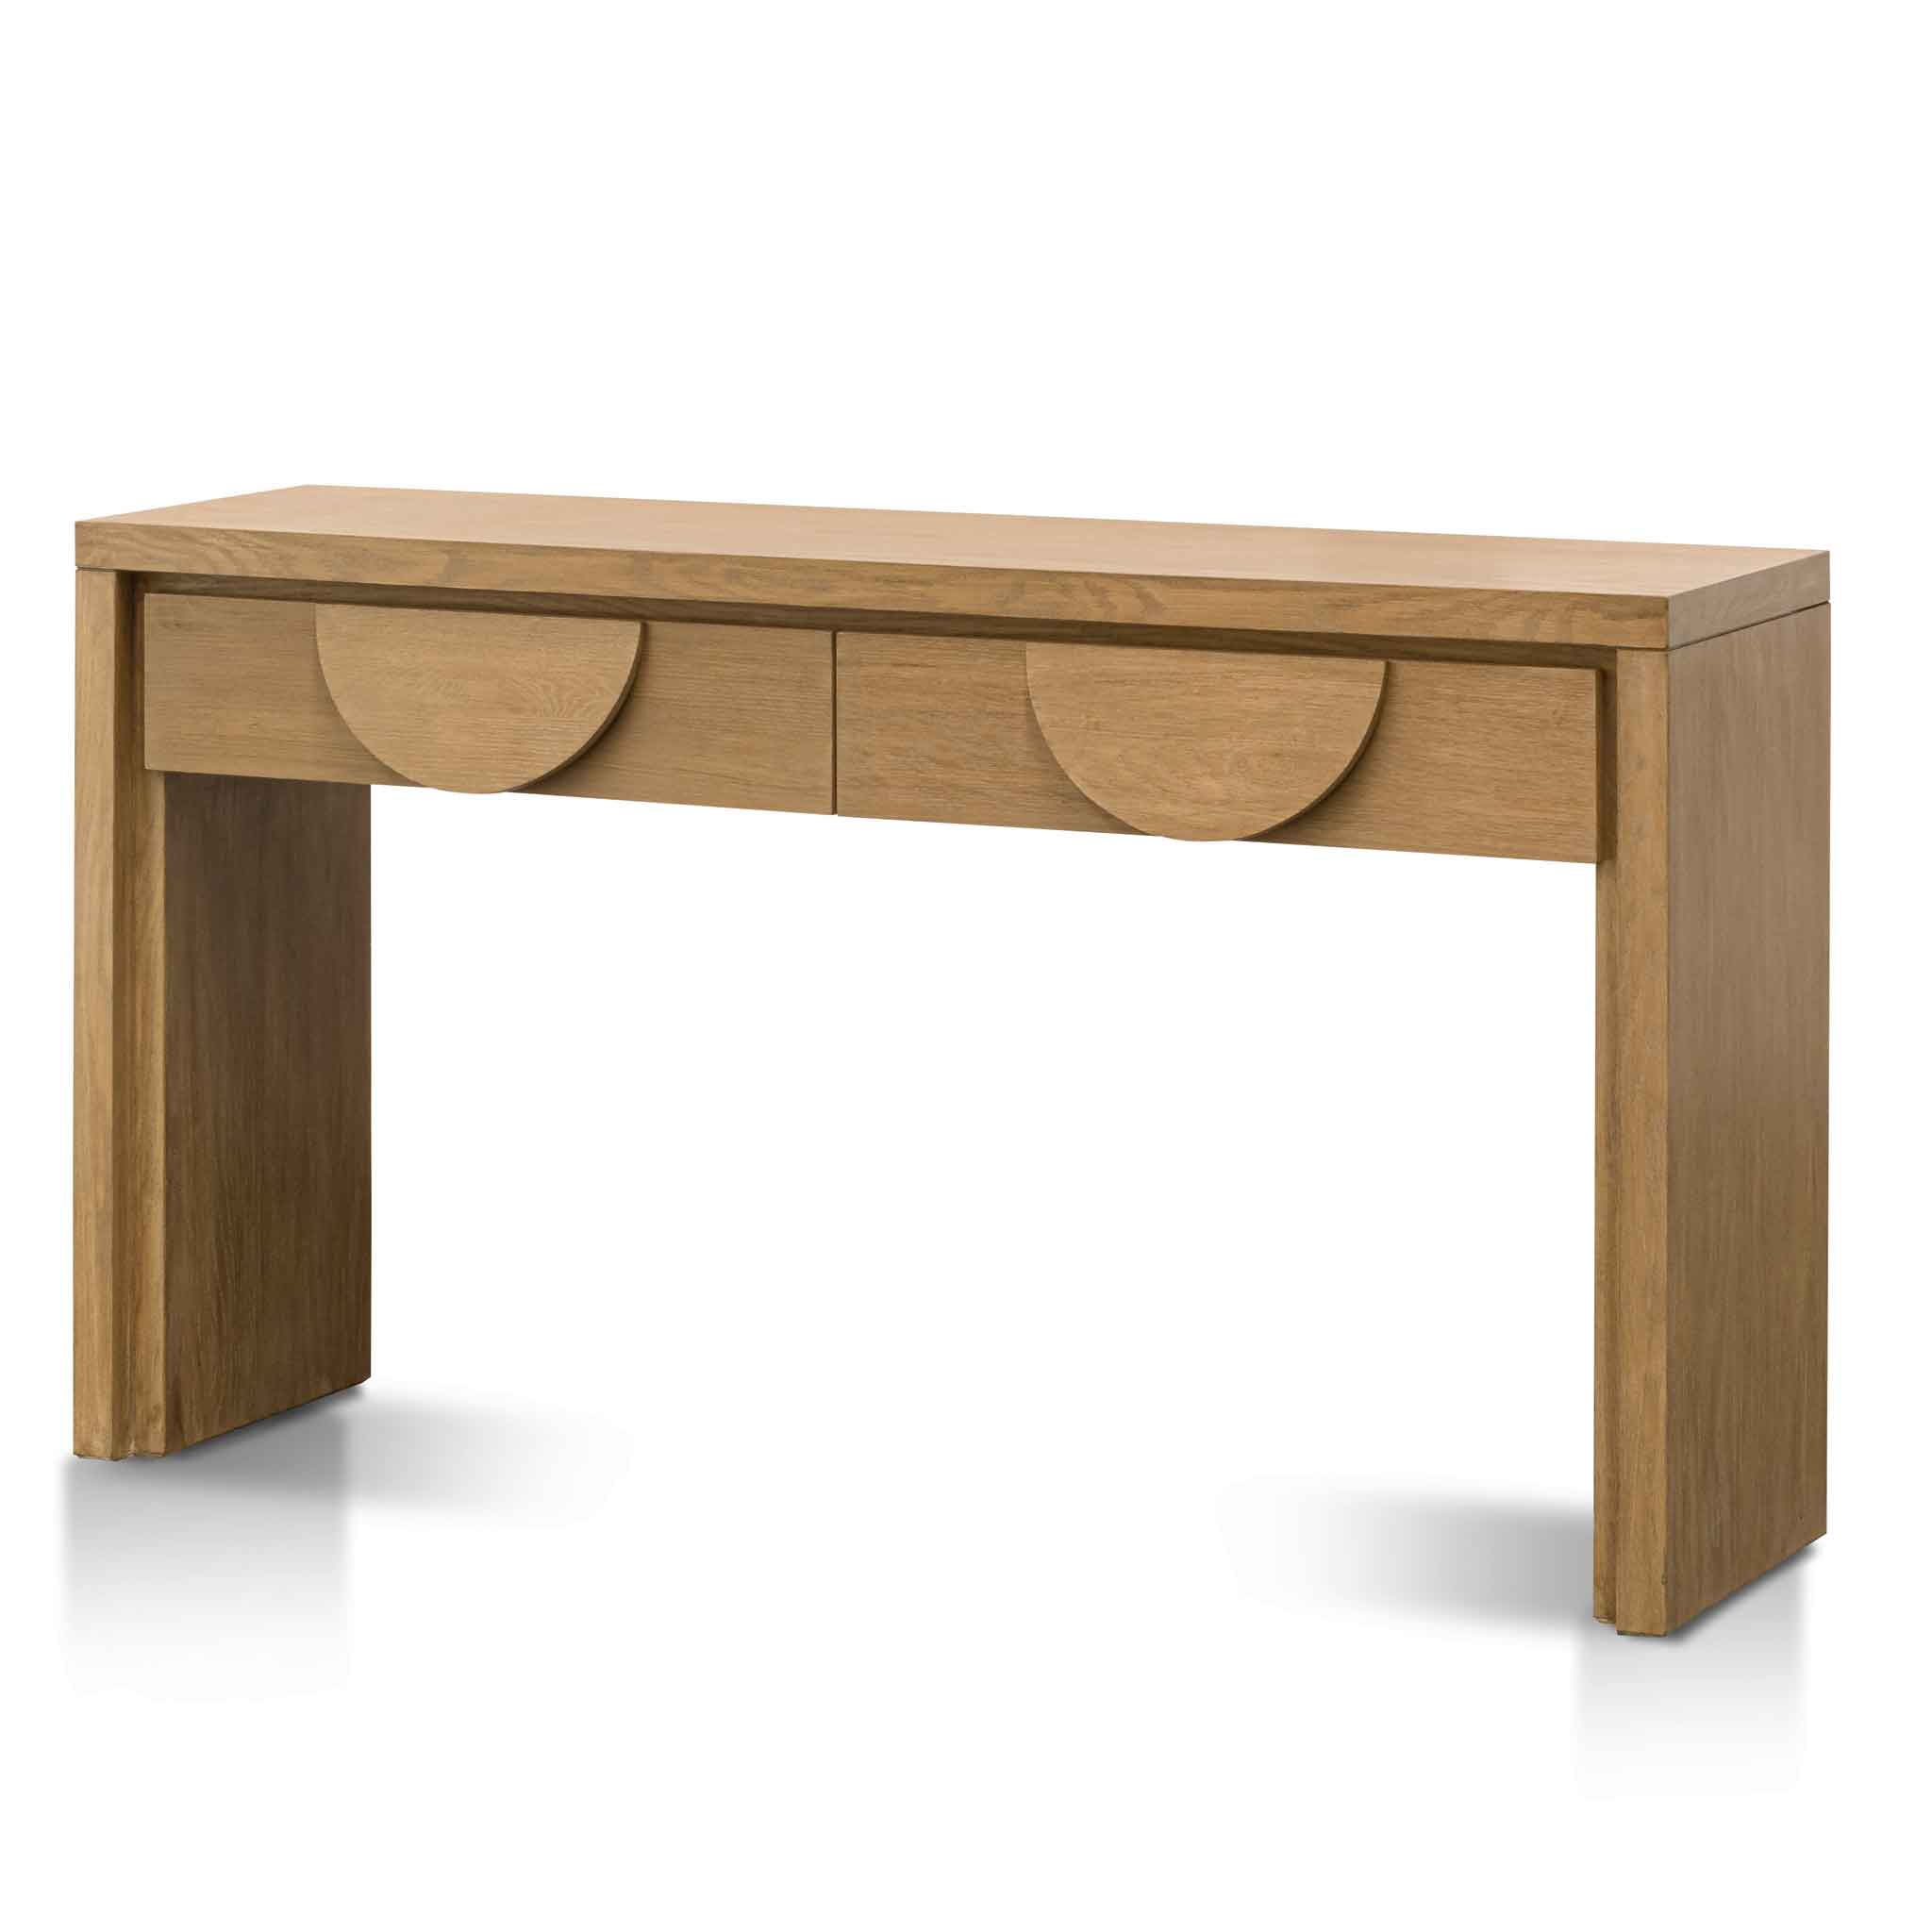 Natalia 140cm Console Table with Drawers - Dusty Oak